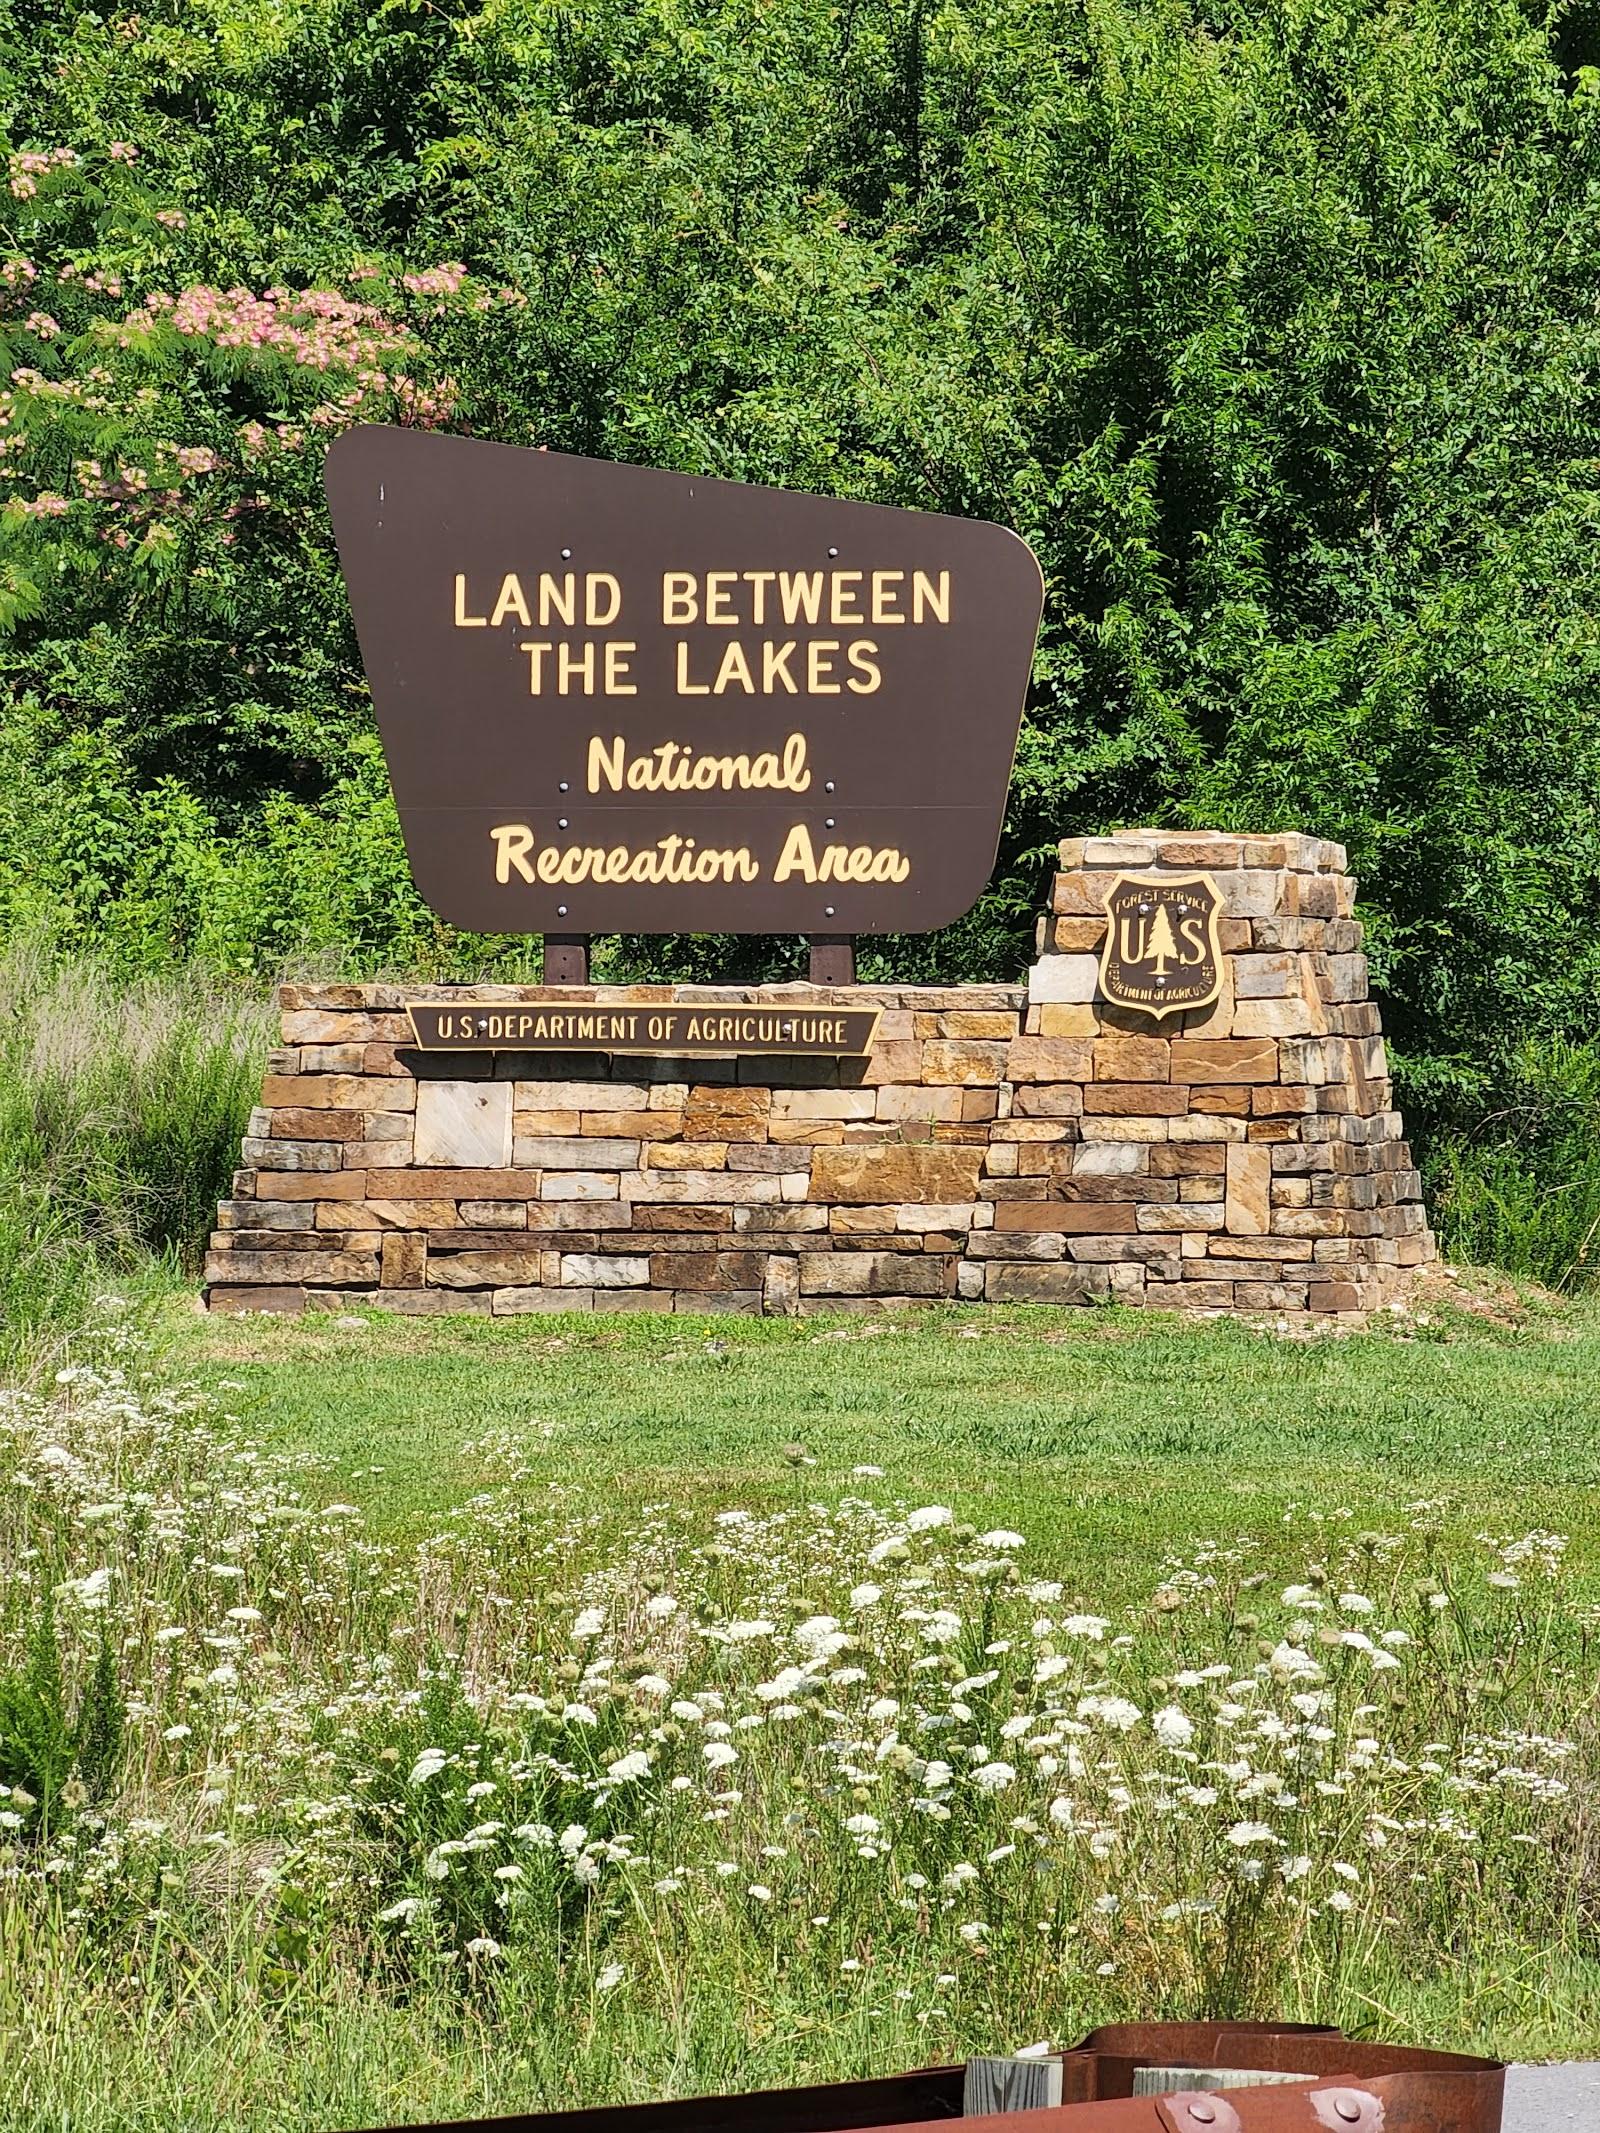 Sandee Land Between The Lakes National Recreation Area Photo